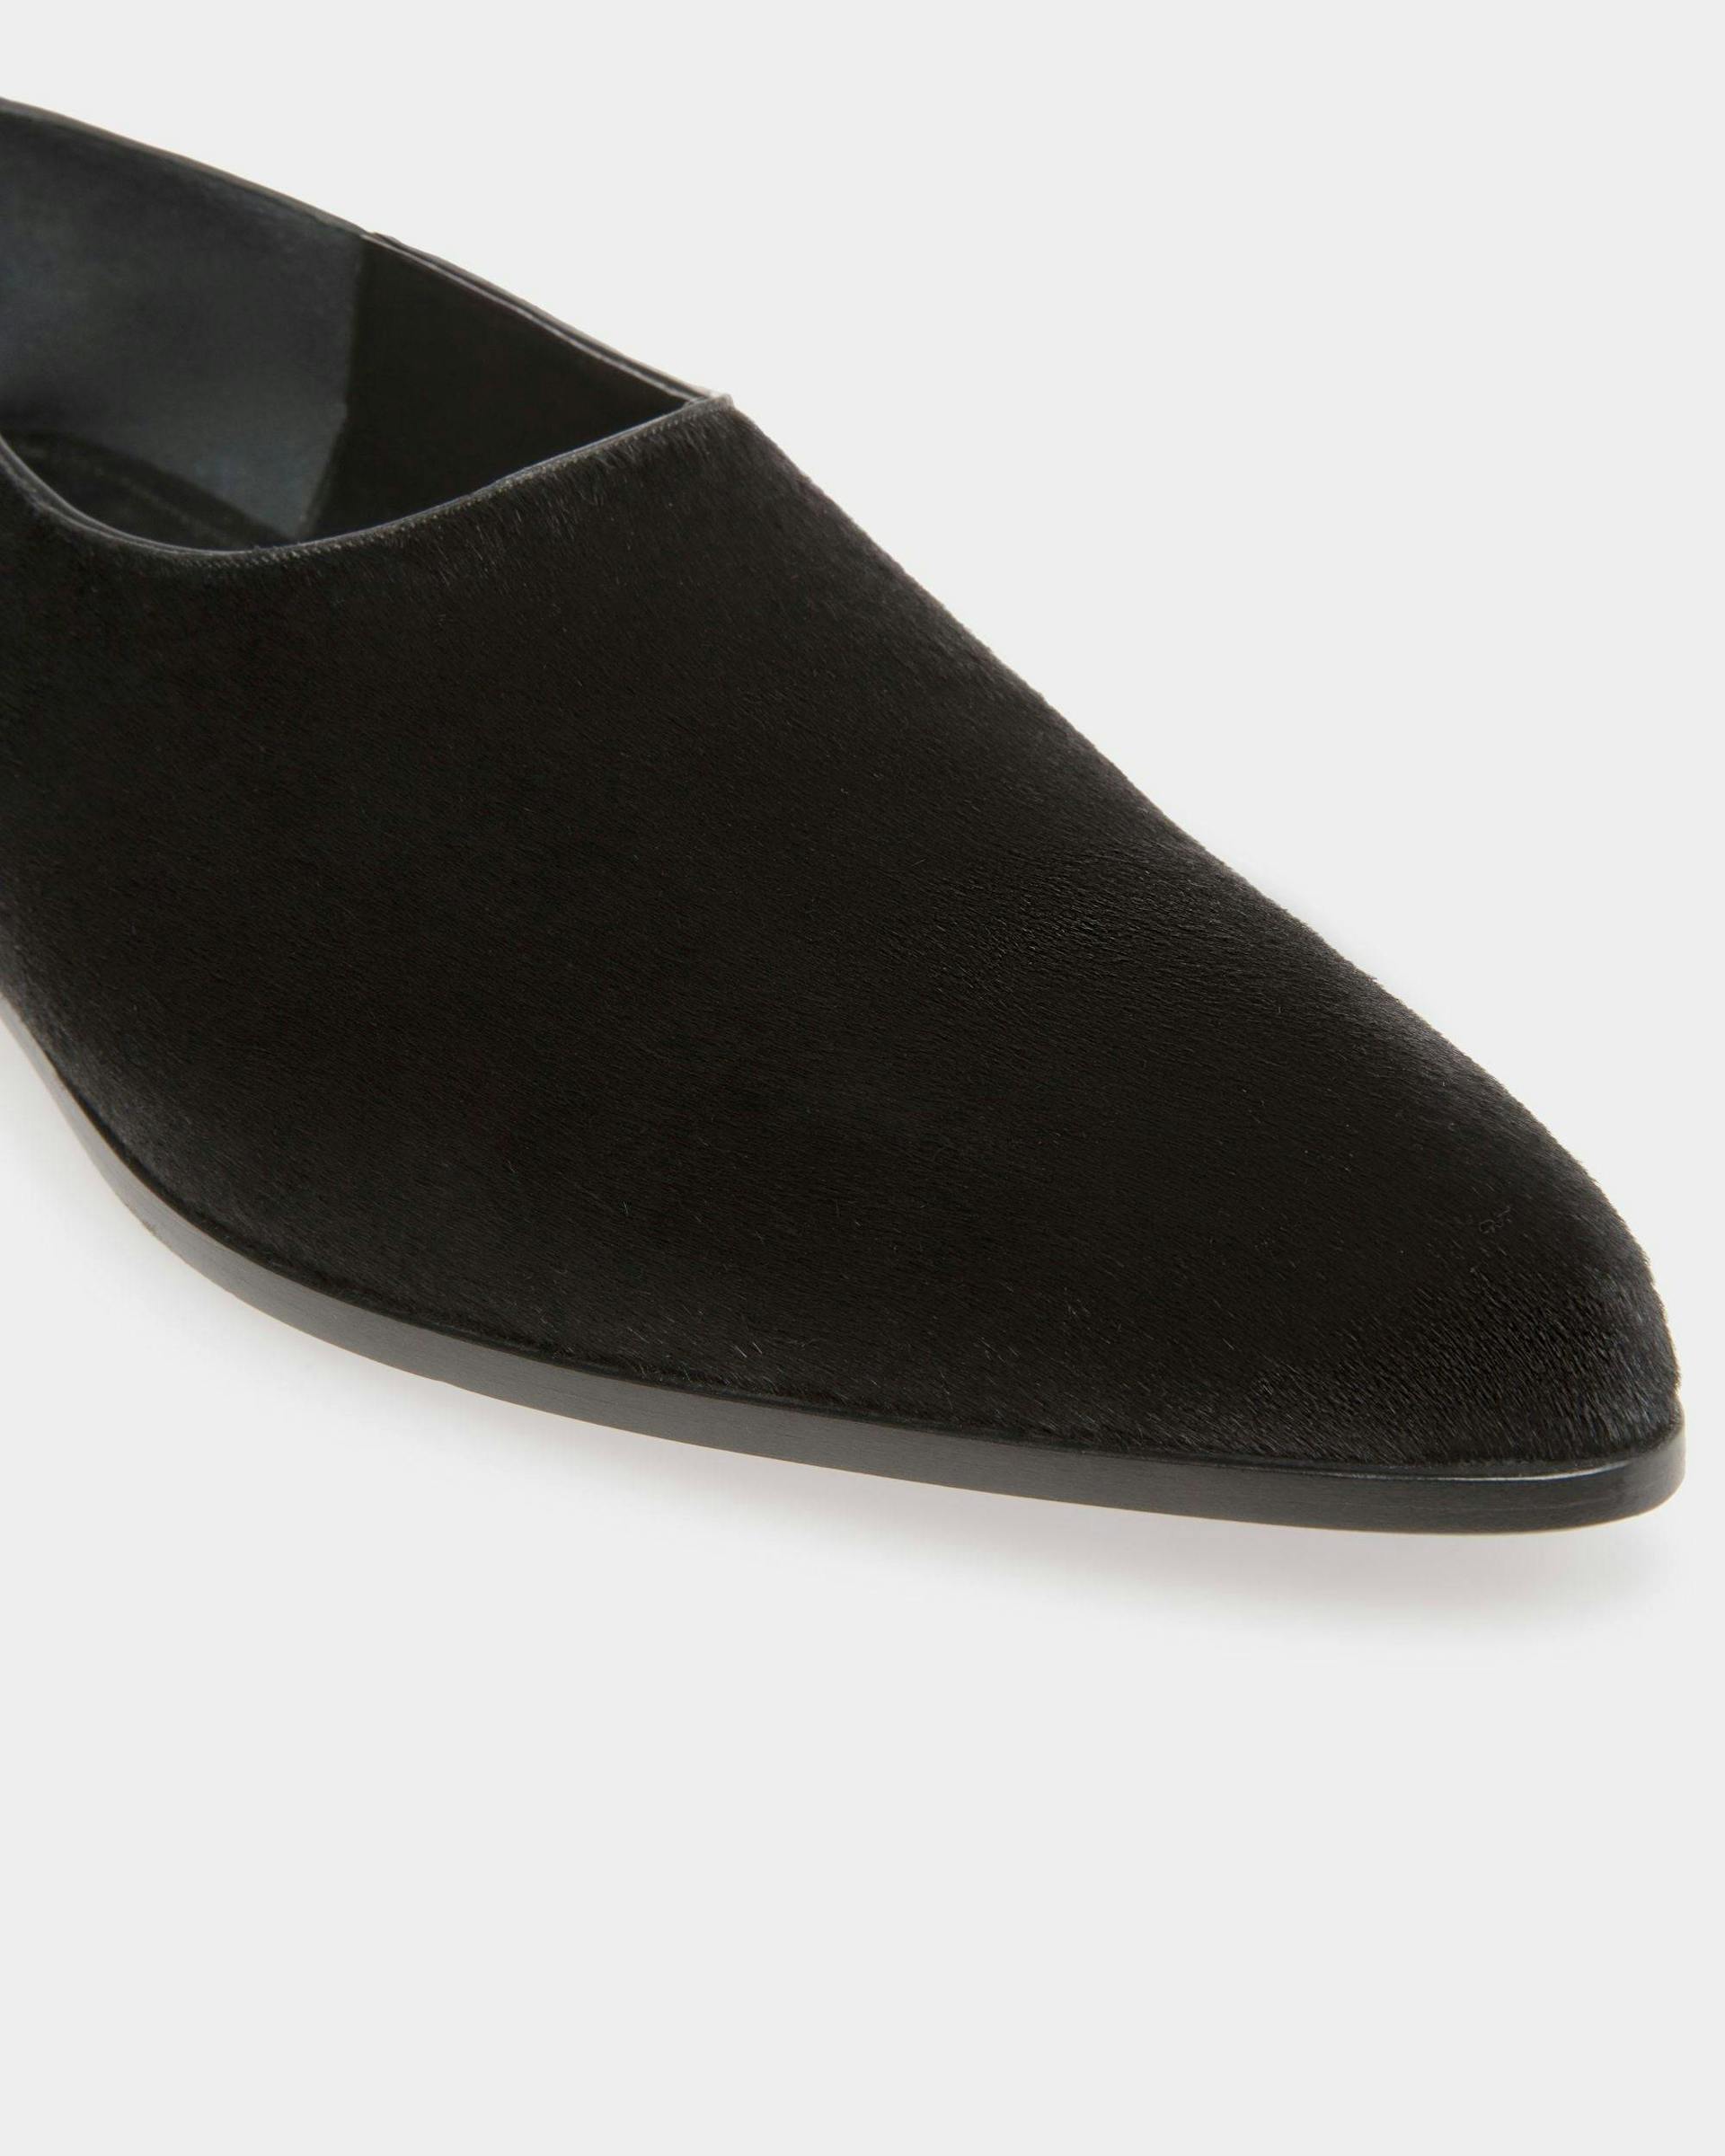 Men's Vegas Flat Loafers In Black Haircalf Leather | Bally | Still Life Detail